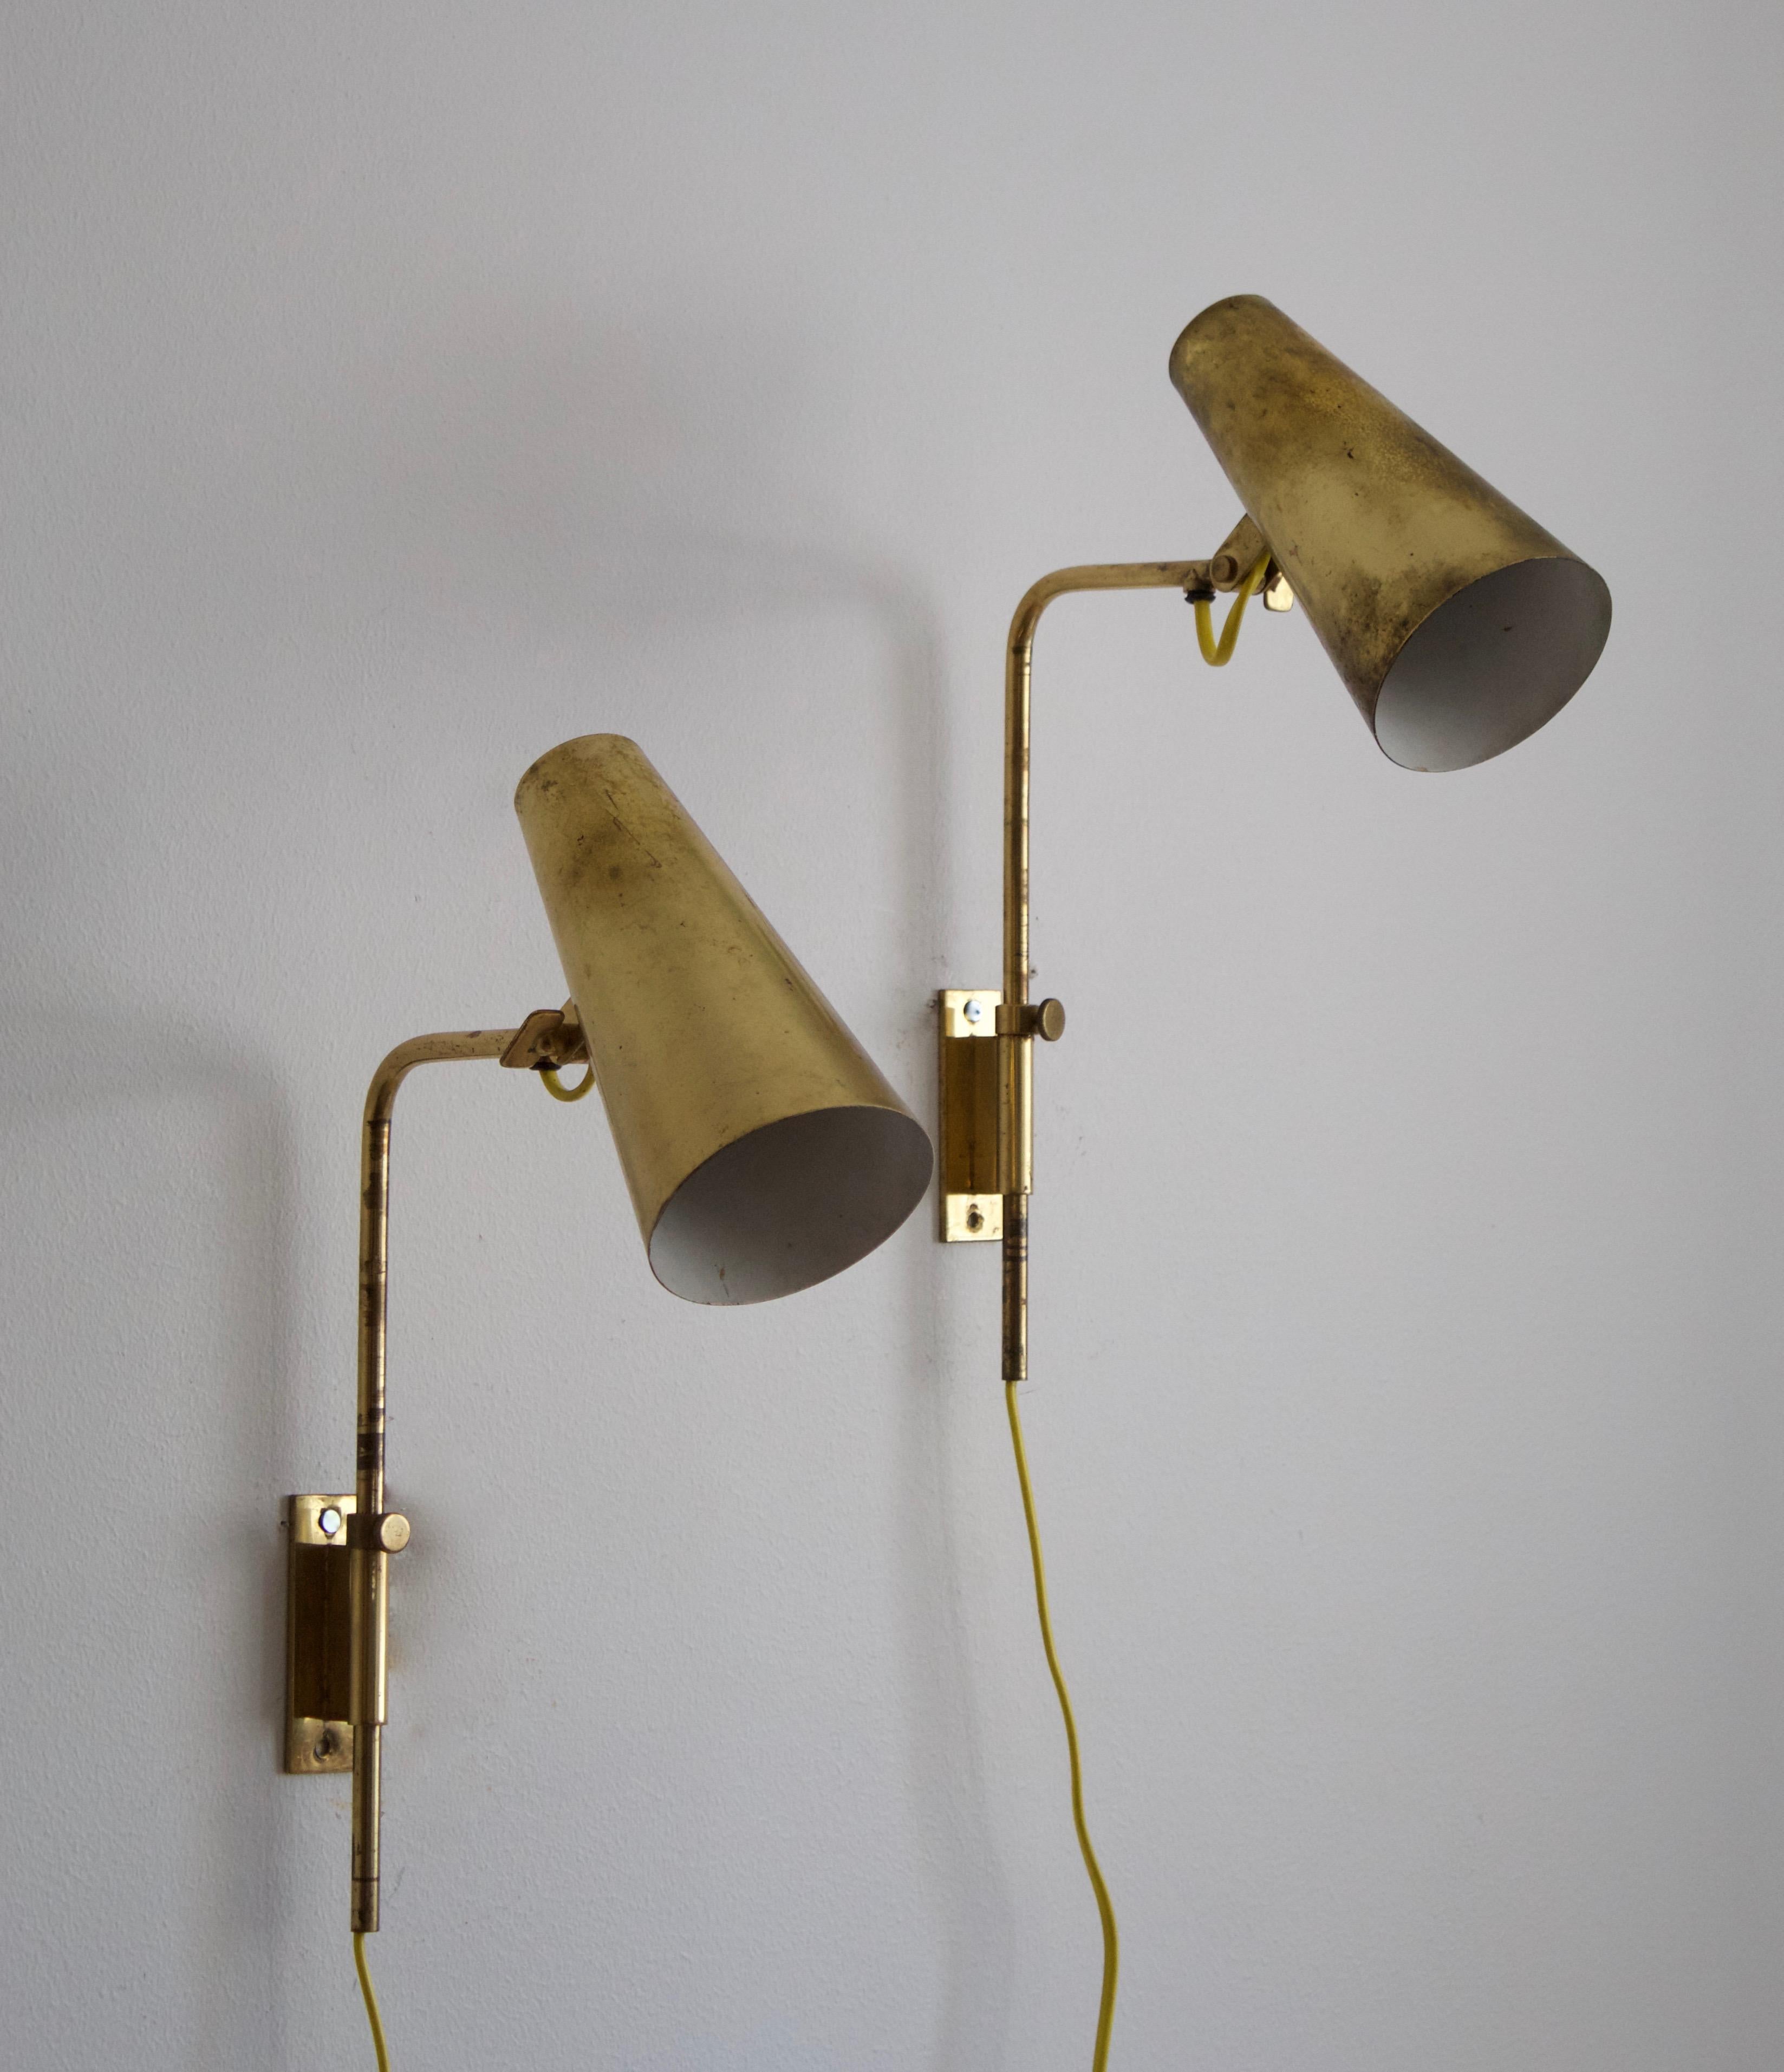 A pair of adjustable wall light / task lights. Model 9459, designed by Paavo Tynell for his own firm Taito OY, Finland, 1950s.